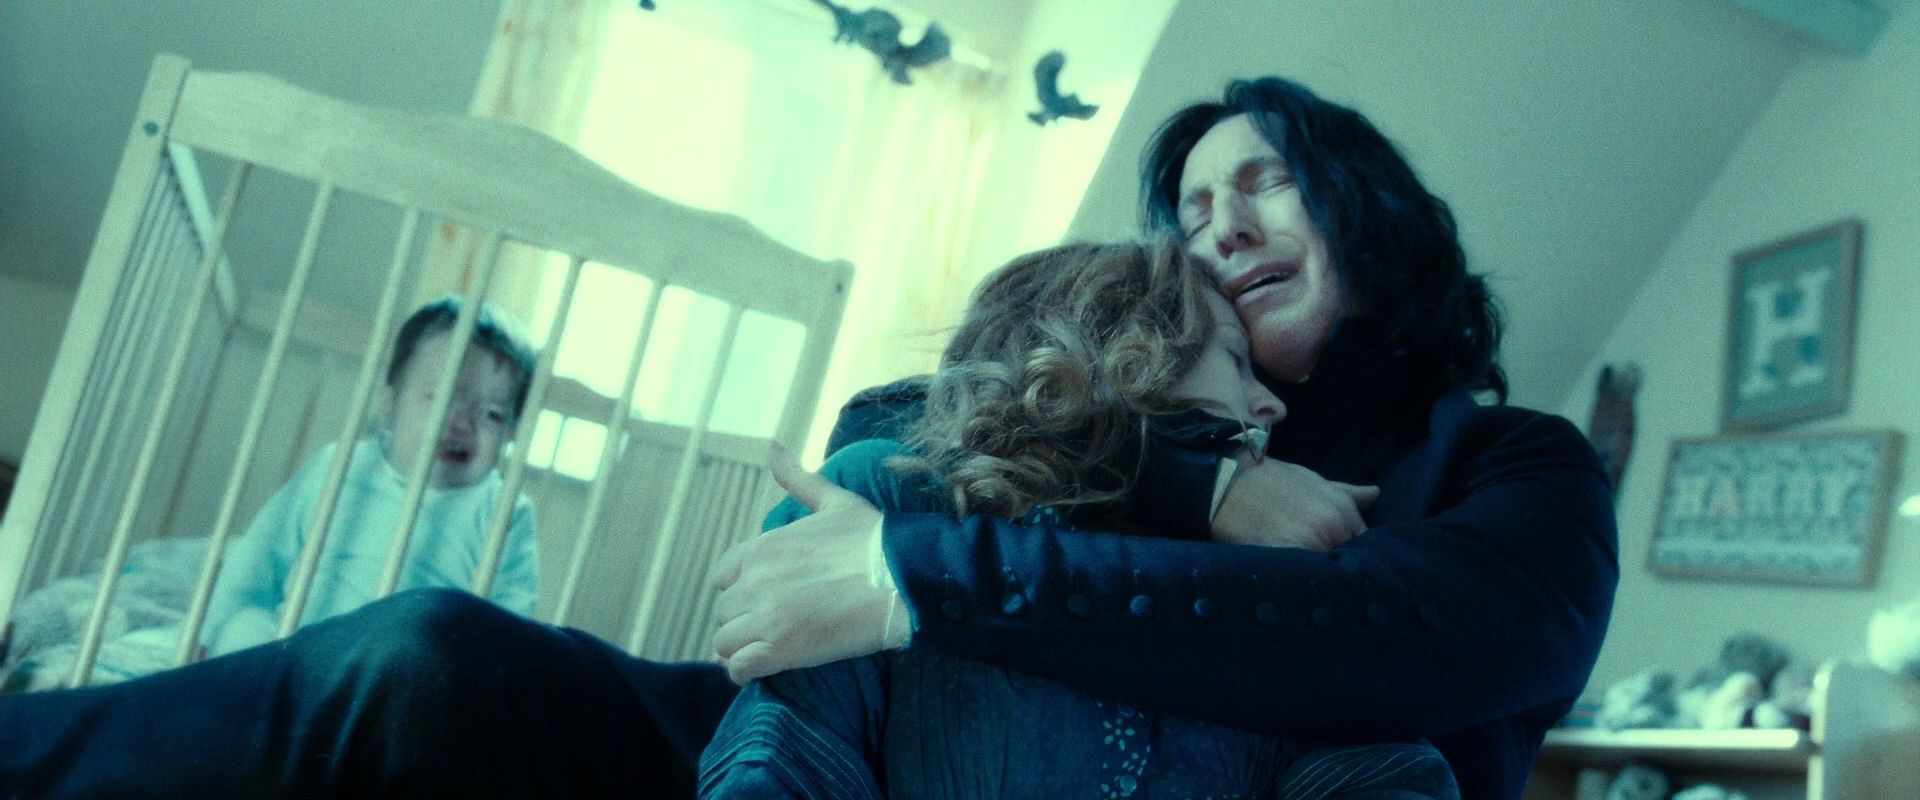 Harry-Potter-7-Deathly-Hallows-Part-2-severus-snape-and-lily-evans-27568485-1920-800